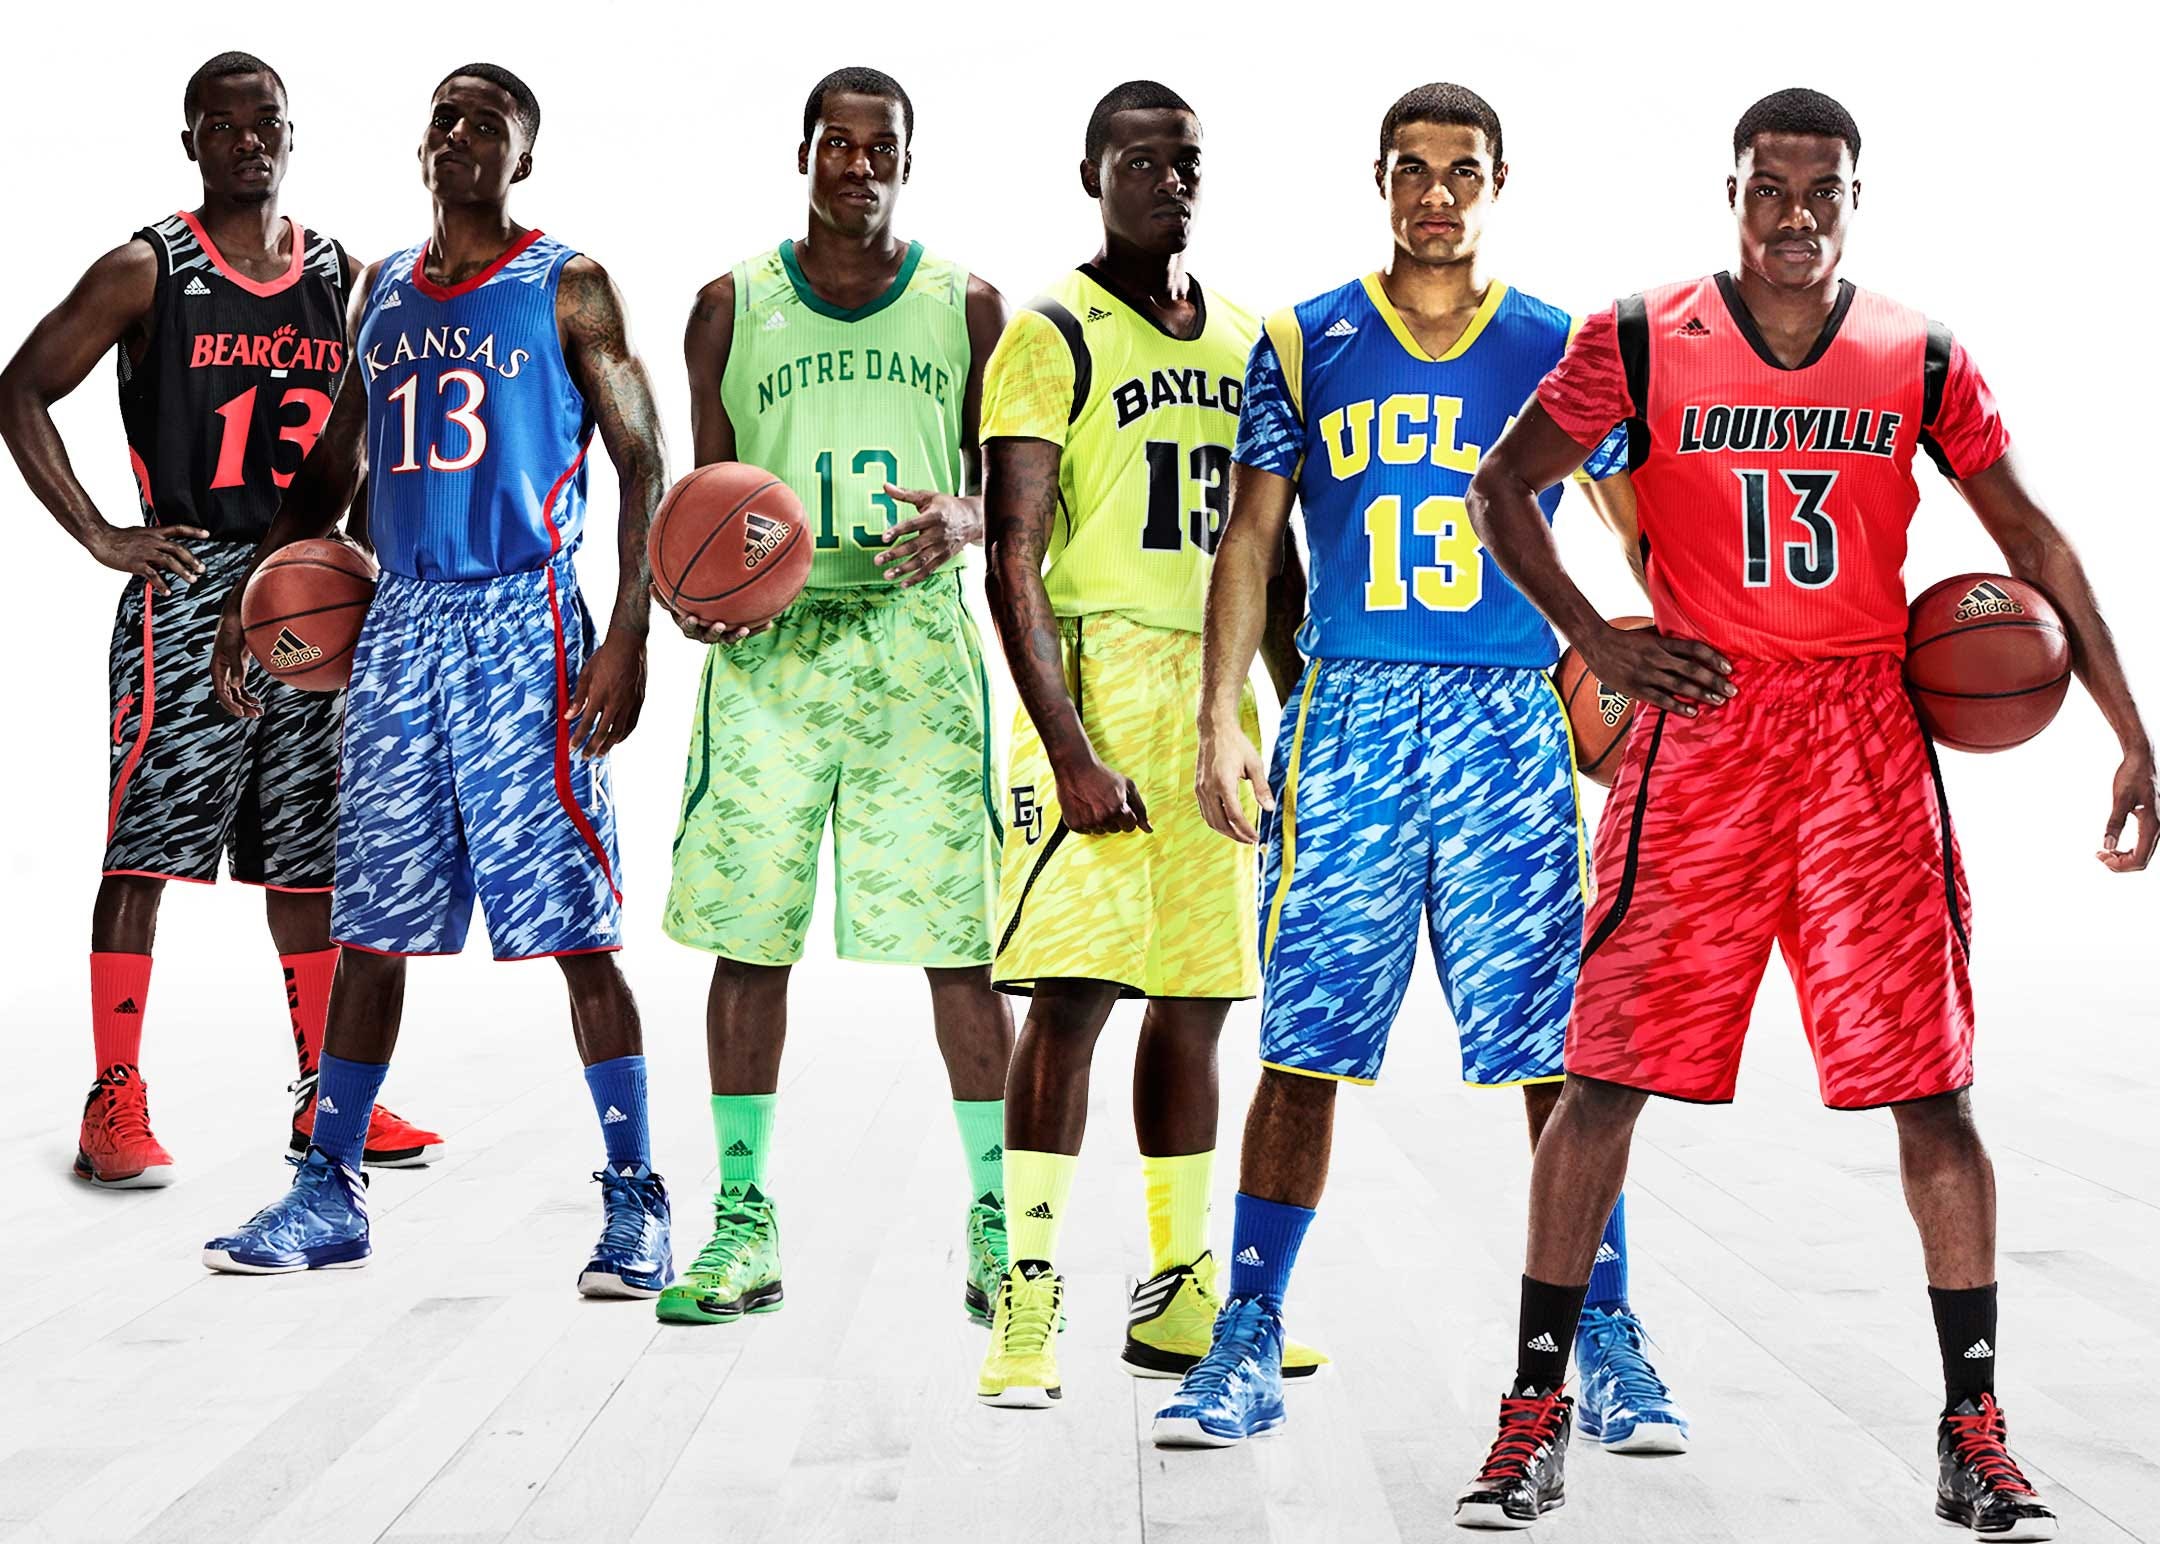 here-are-the-wild-new-adidas-uniforms-that-six-college-basketball-powers-will-wear-during-march-madness.jpg